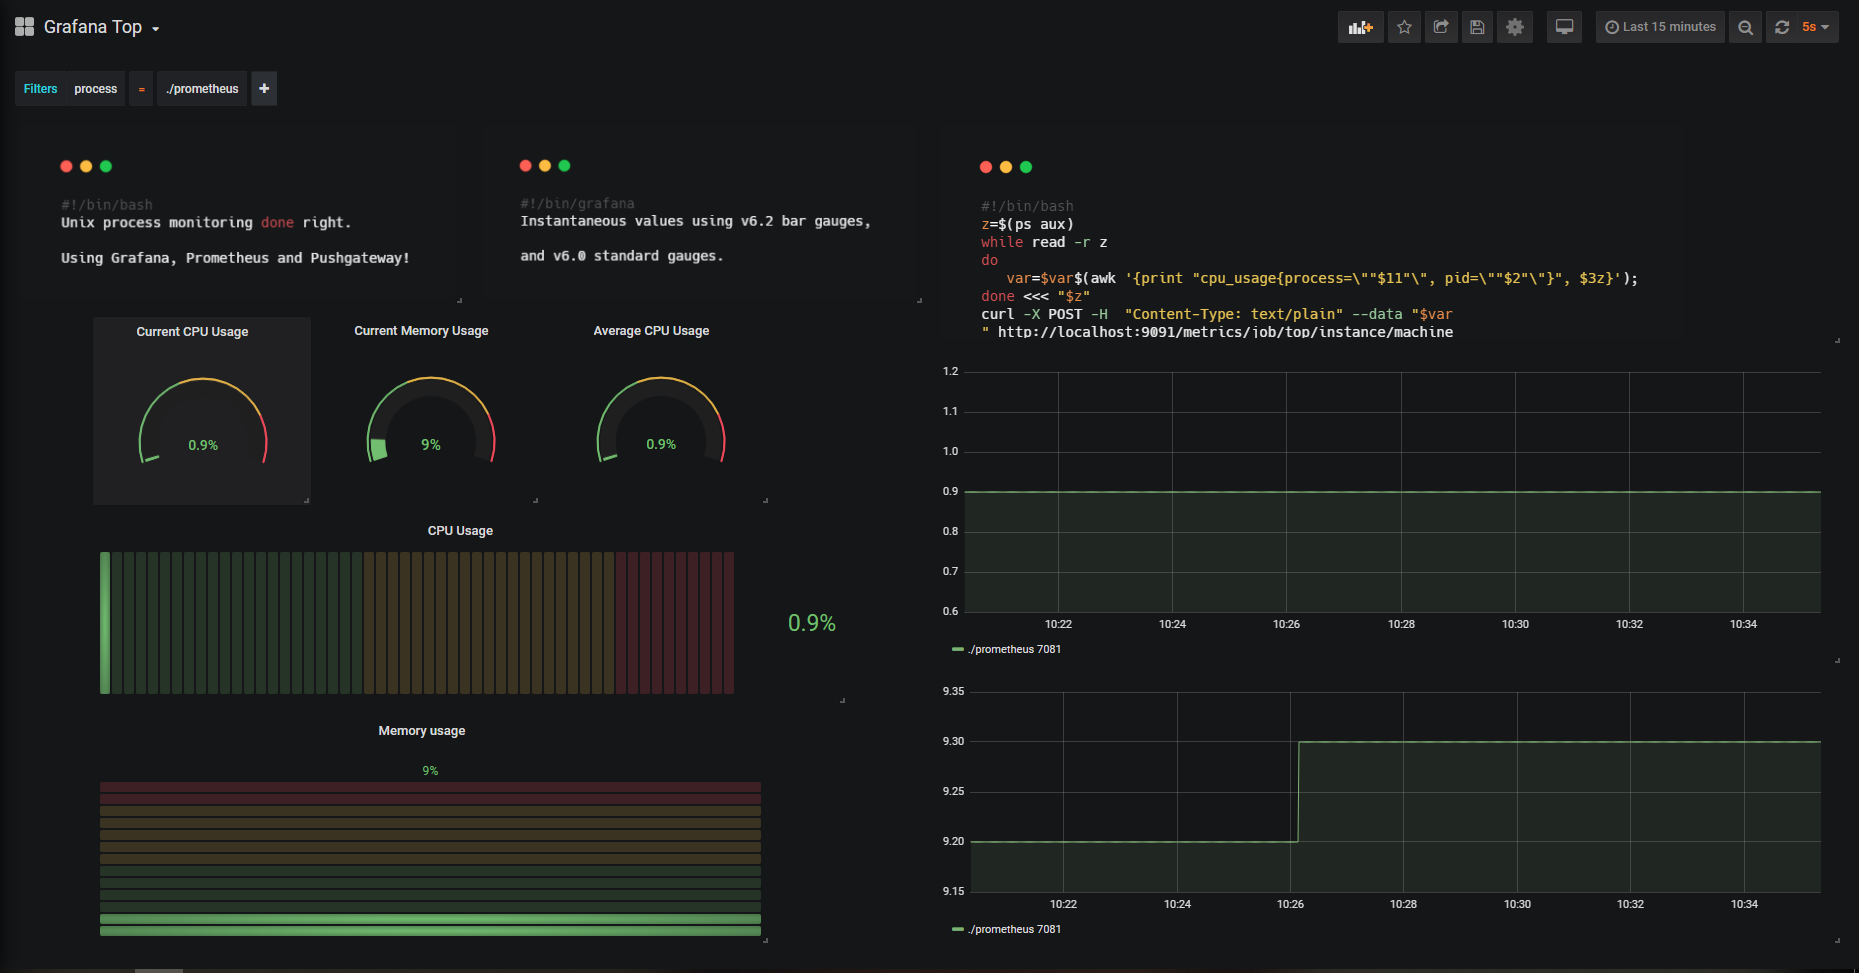 wechat/articles/2020/06/2020-06-03-monitoring-linux-processes-using-prometheus-and-grafana/udate-dashboard.png